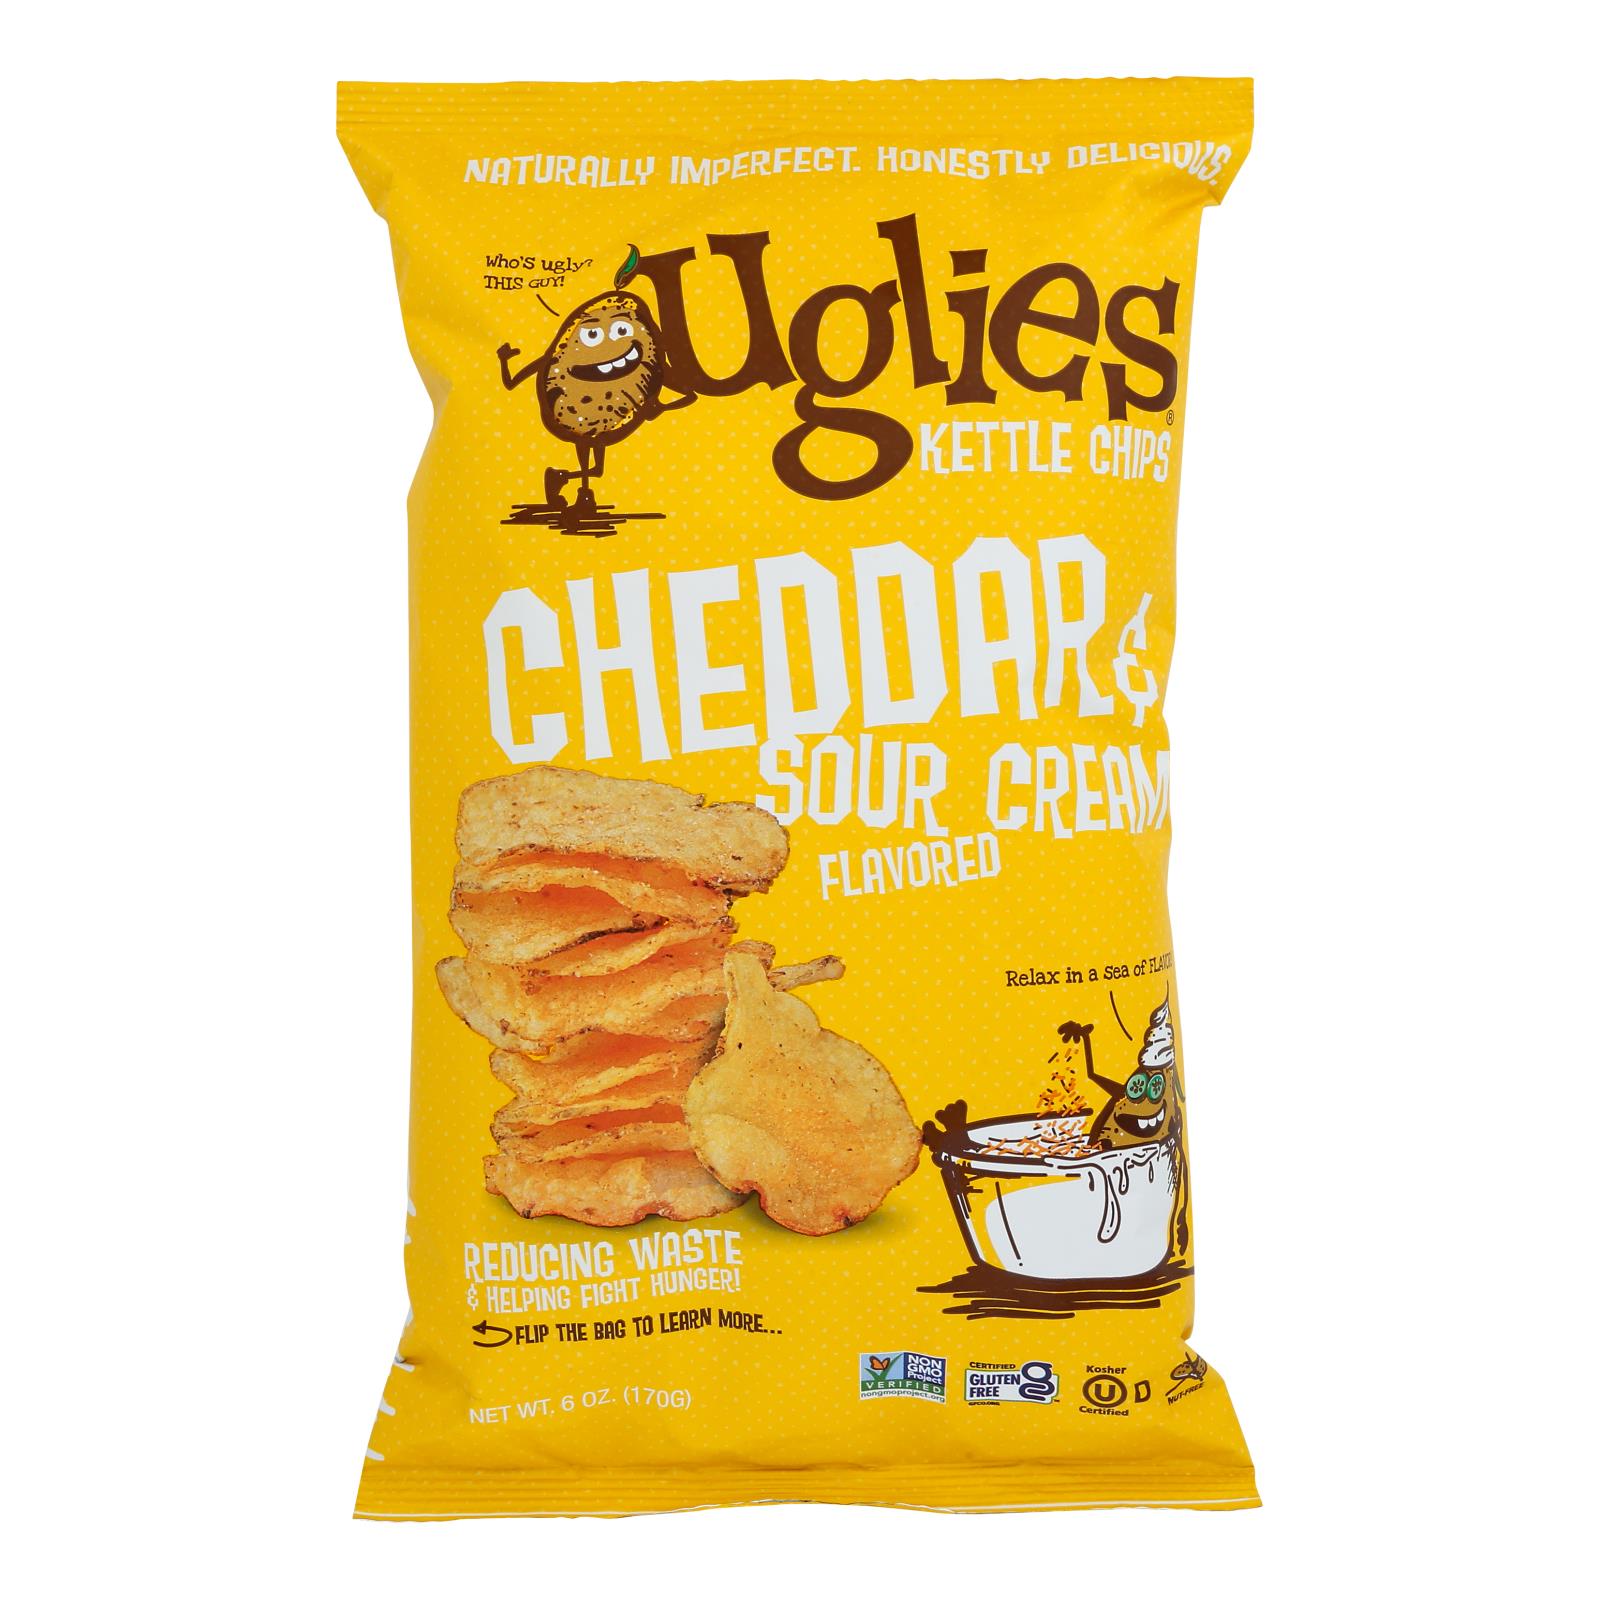 Uglies - Pot Chips Ched&sour Cream - Case of 12-6 OZ